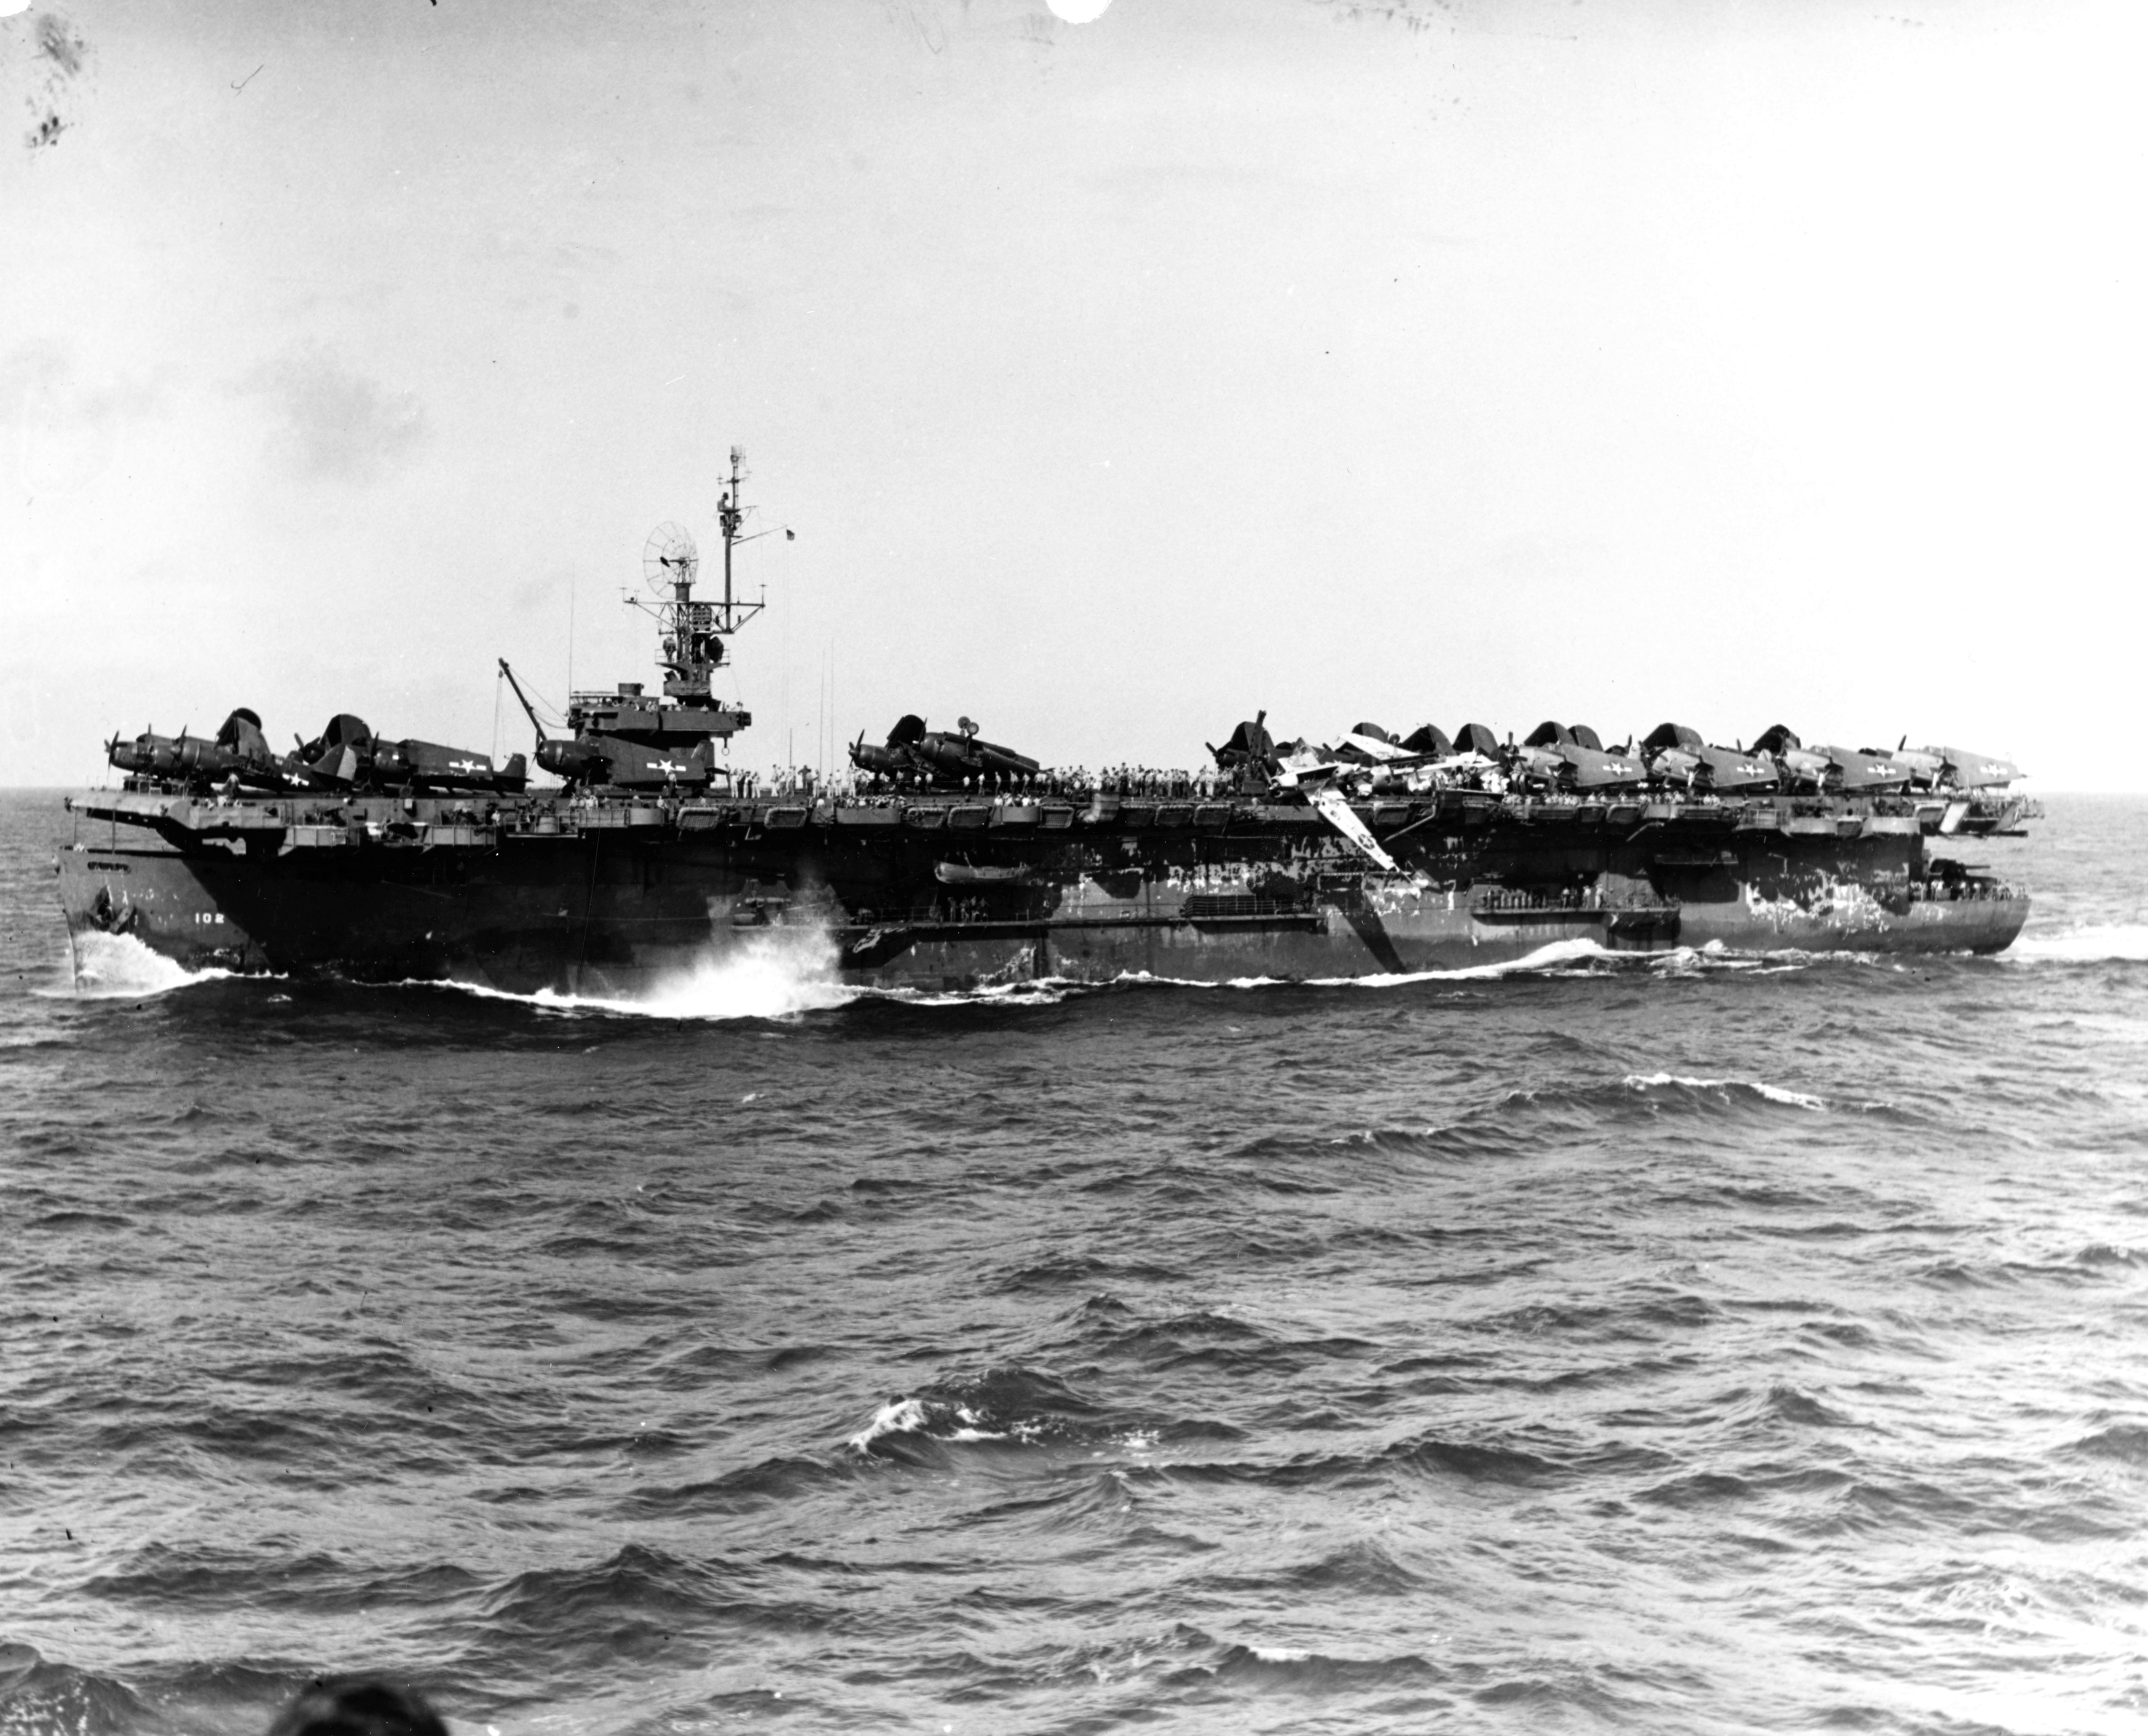 Escort carrier USS Attu the morning after riding out a punishing typhoon that scattered aircraft all over the flight deck and washed 3 aircraft overboard, 5 Jun 1945.